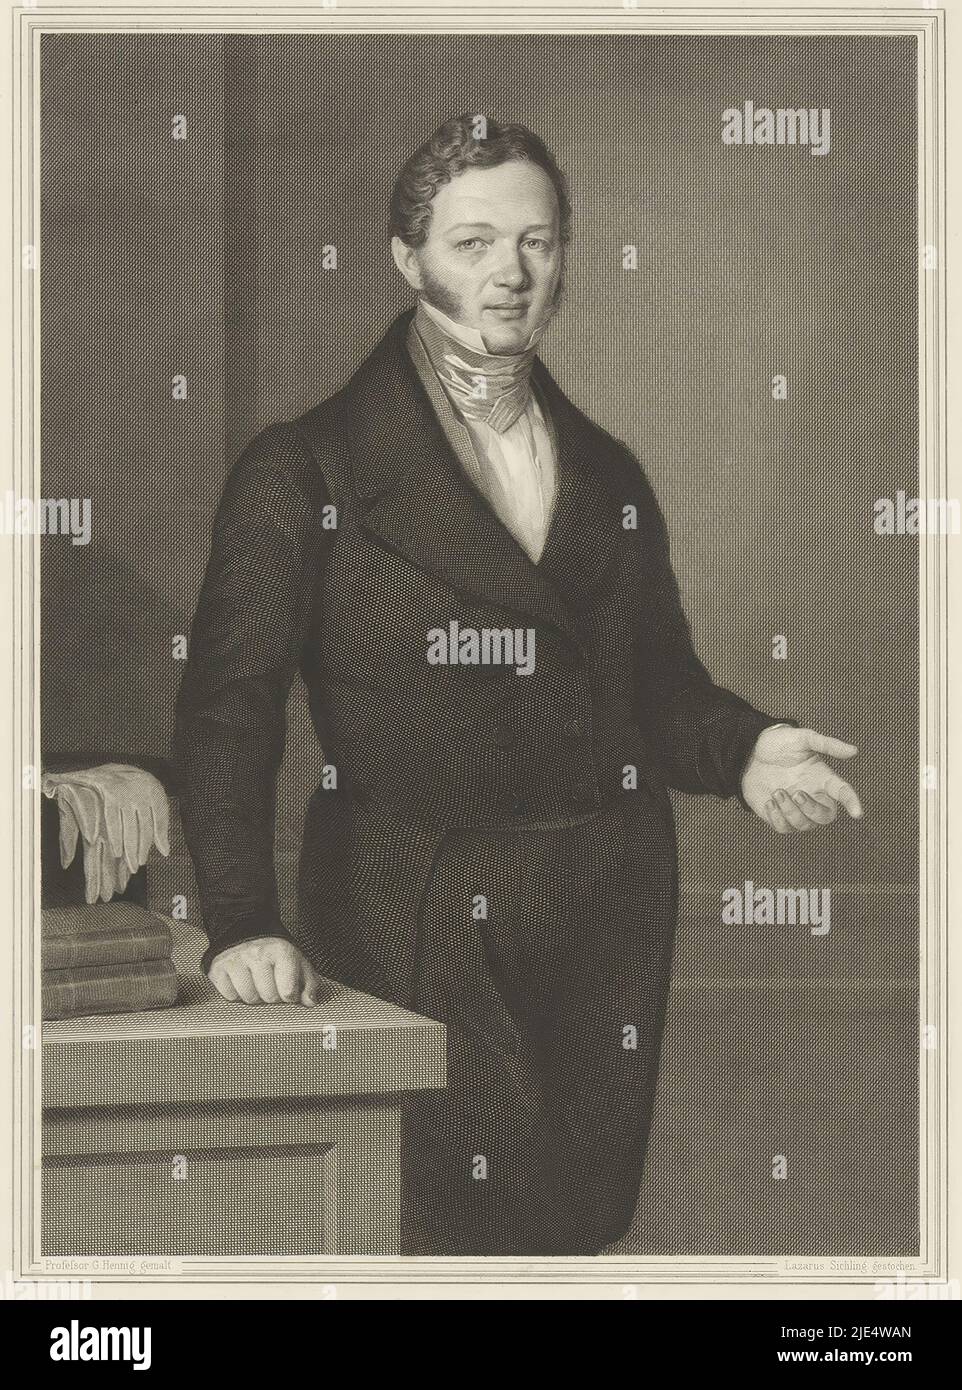 Portrait of Friedrich Ludwig Meissner, print maker: Lazarus Gottlieb Sichling, (mentioned on object), G. Hennig, (mentioned on object), 1822 - 1863, paper, steel engraving, h 383 mm - w 268 mm Stock Photo